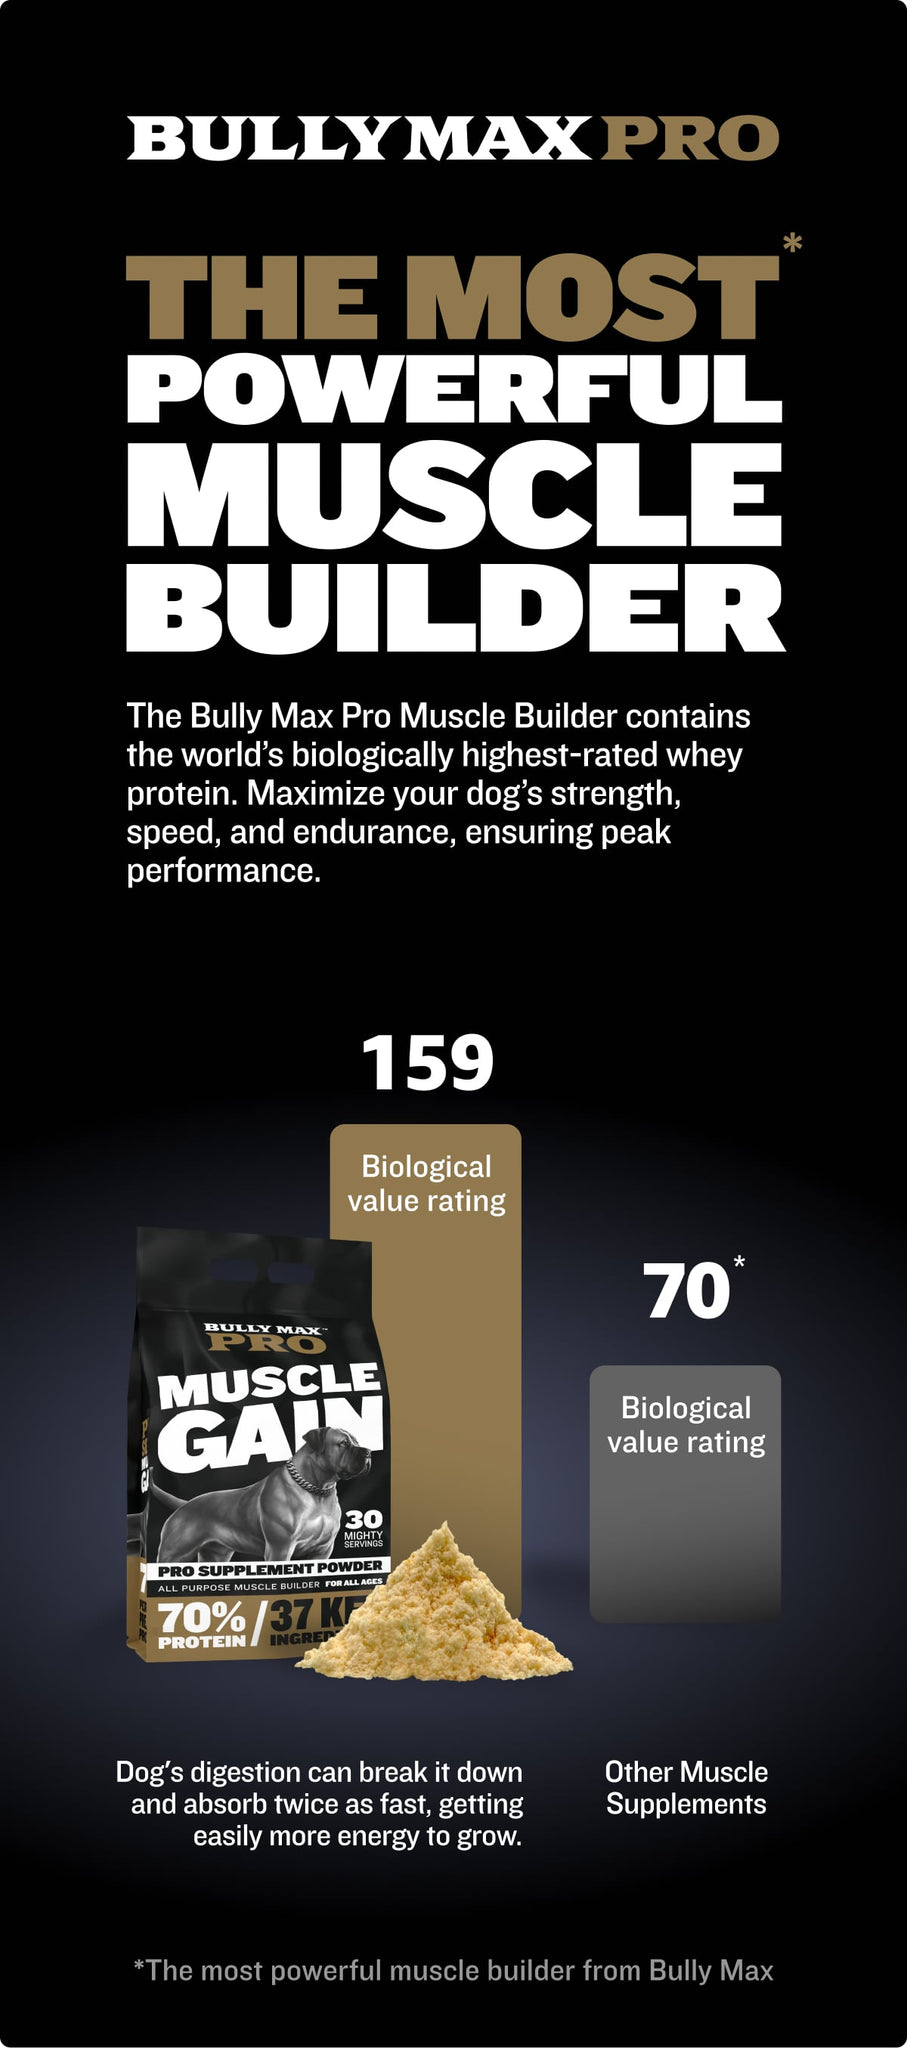 Bully Max Pro is the most powerful muscle builder. With a biological value rating of 159. Professional series supplement.